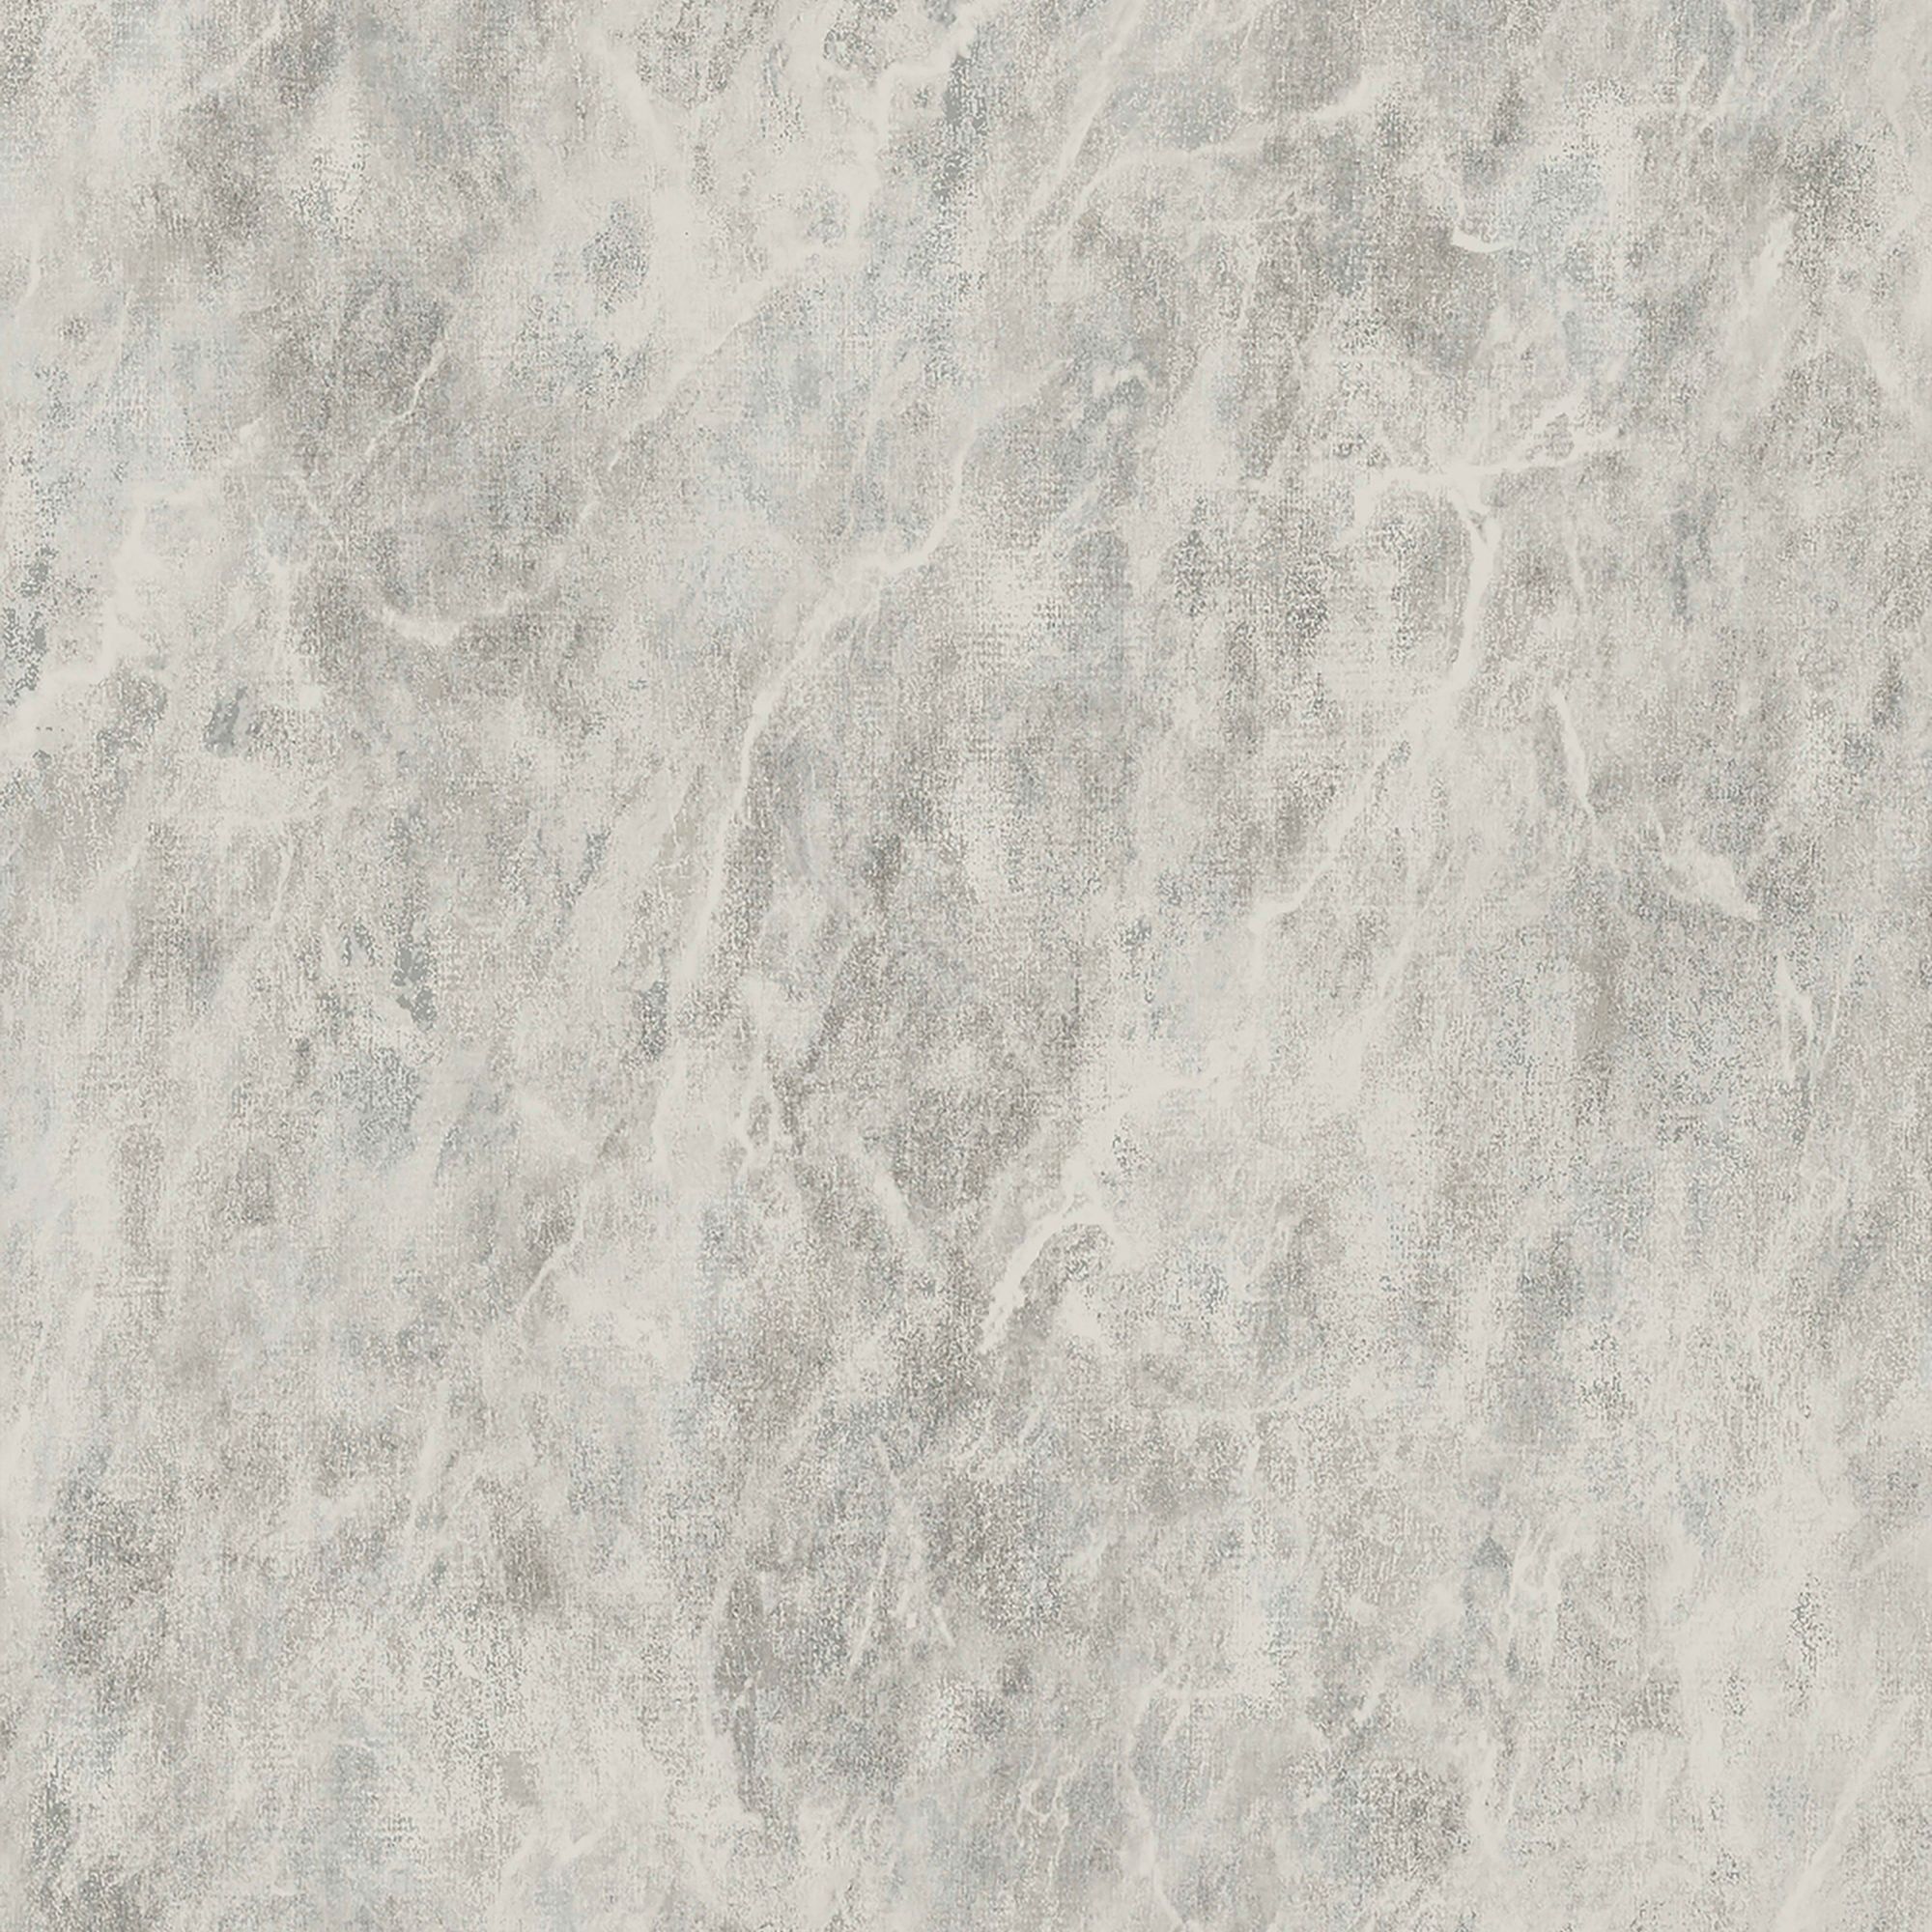 Next Washed marble Neutral Smooth Wallpaper